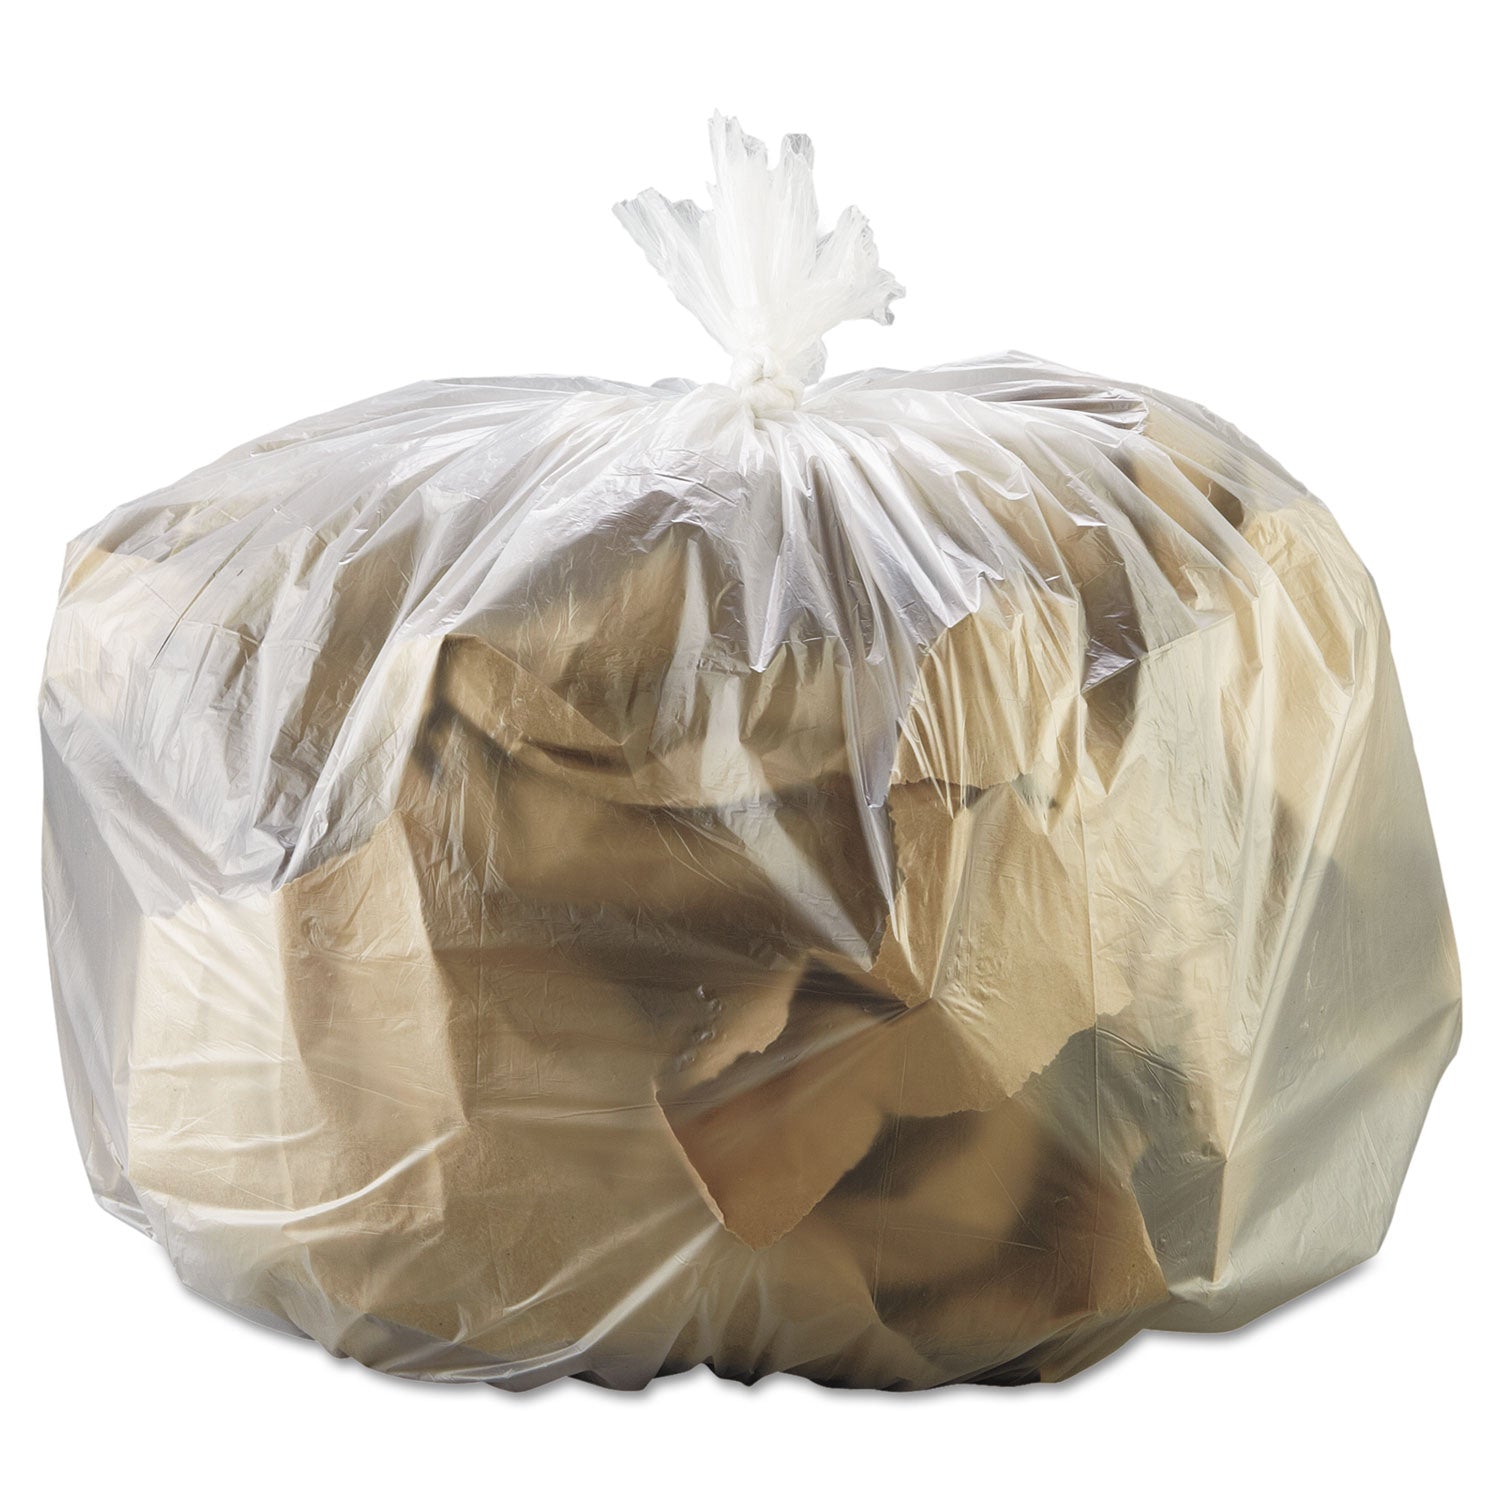 high-density-can-liners-33-gal-13-mic-33-x-39-natural-25-bags-roll-10-rolls-carton_bwk333916 - 1